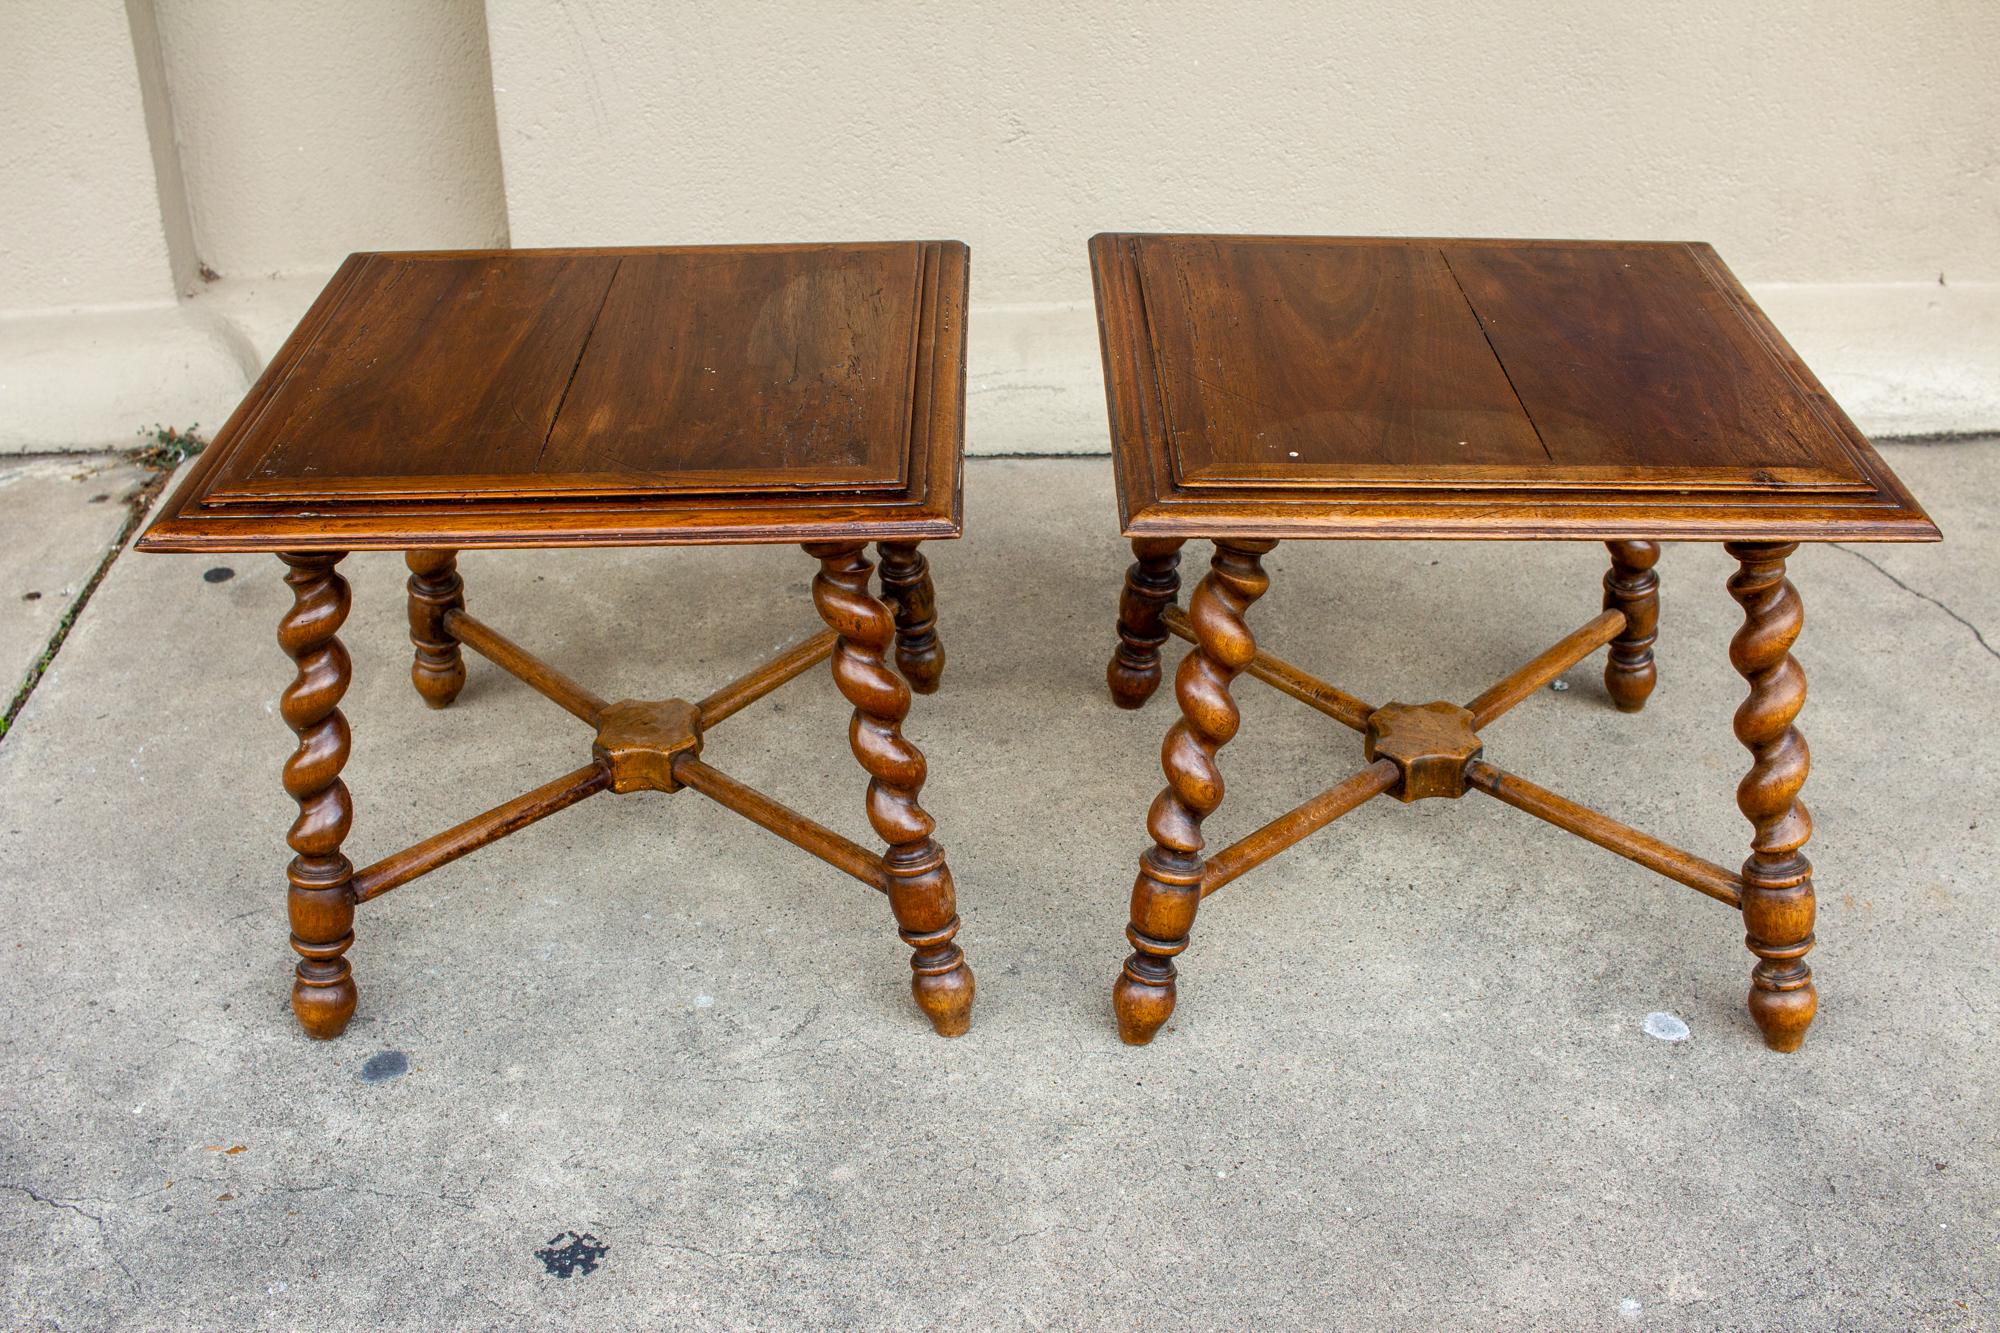 Early 20th Century Pair of French Wood Jacobean Style Barley Twist Leg Side Tables, circa 1900